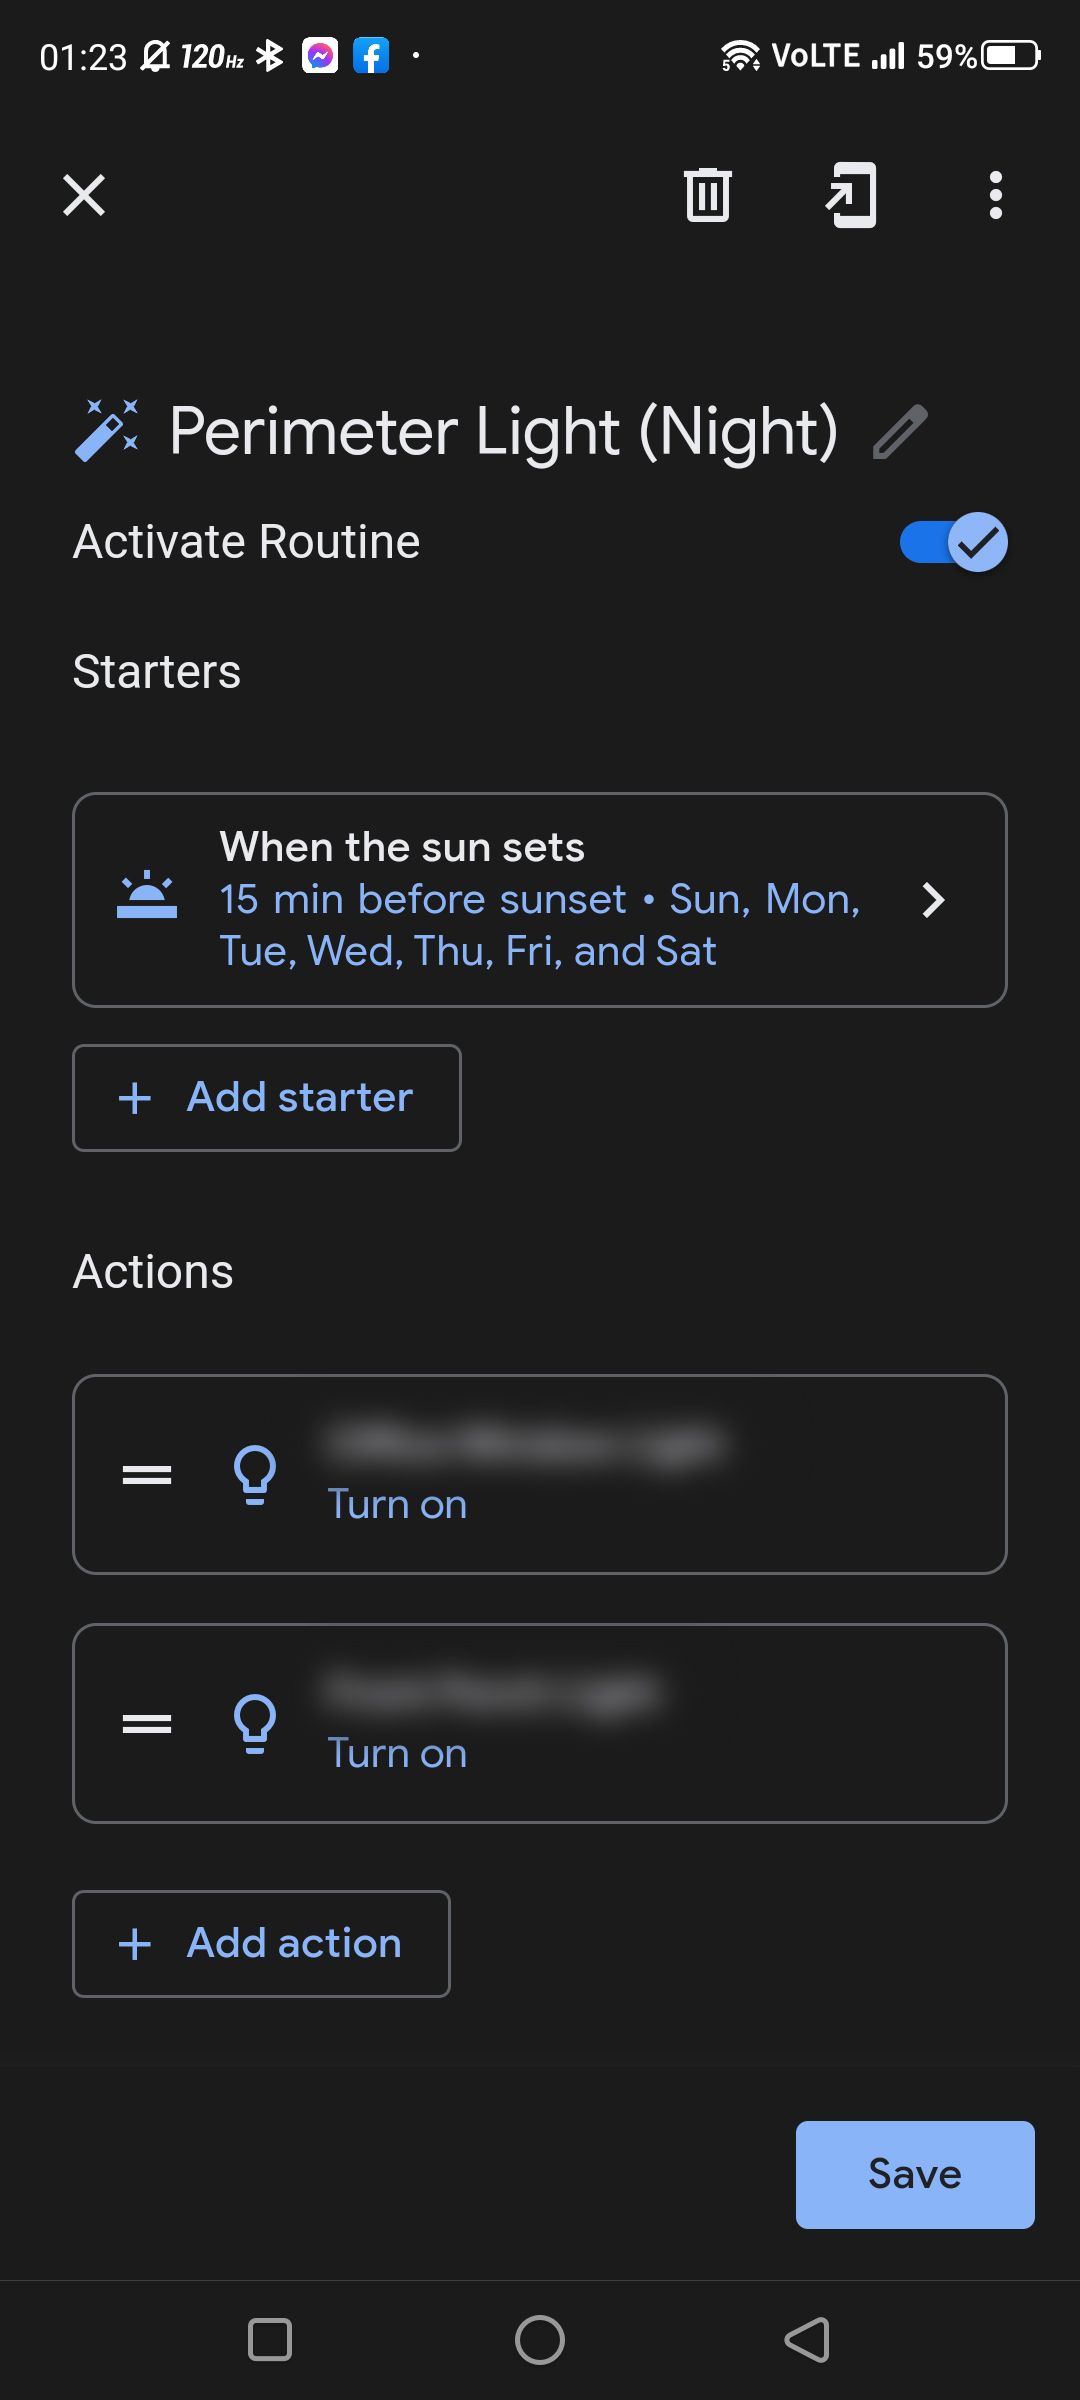 Light Automation on Google Home at Sunset